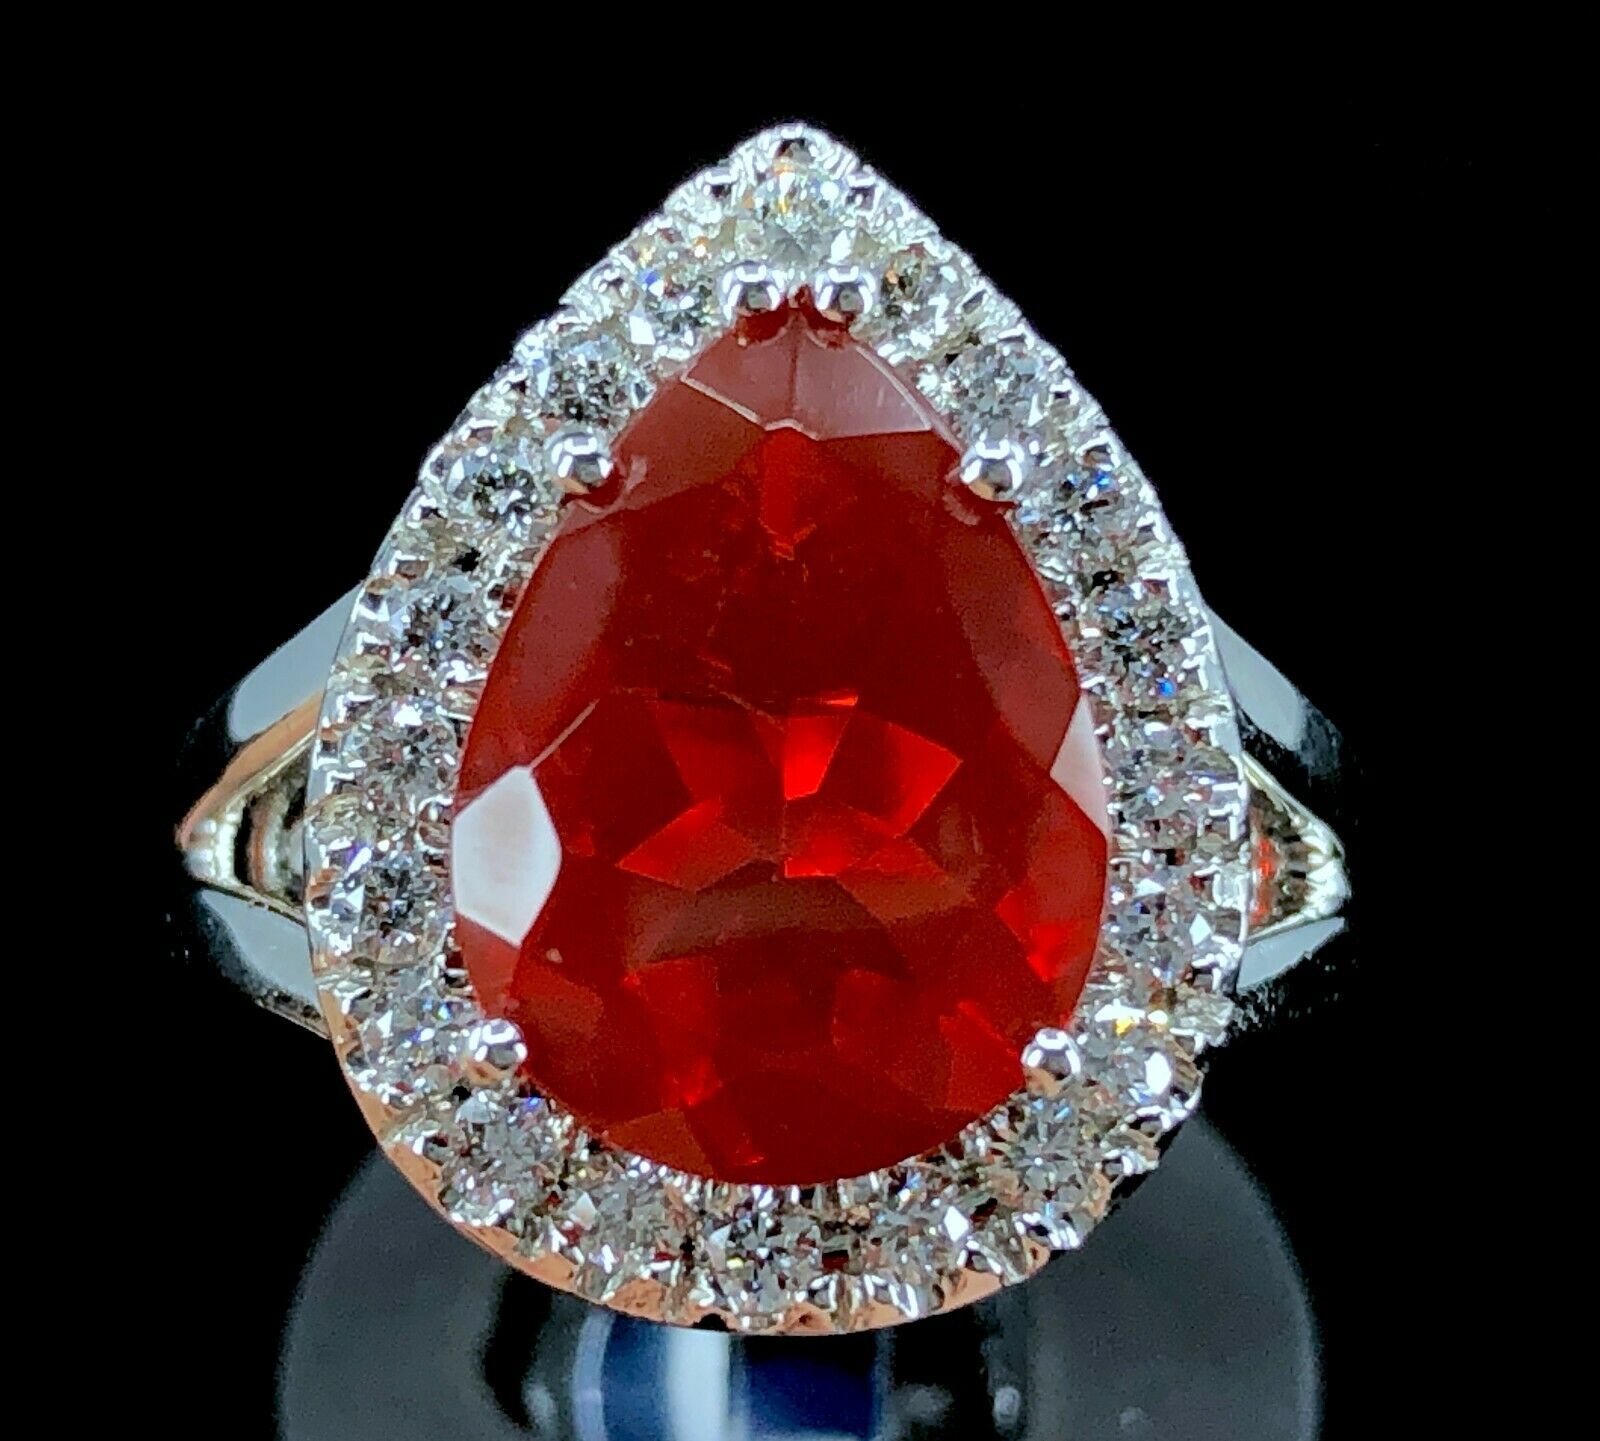 Efterligning Okklusion Pinpoint GIA 3.19 ct. Red Fire Opal & Diamond Ring in Platinum – Global Gemology